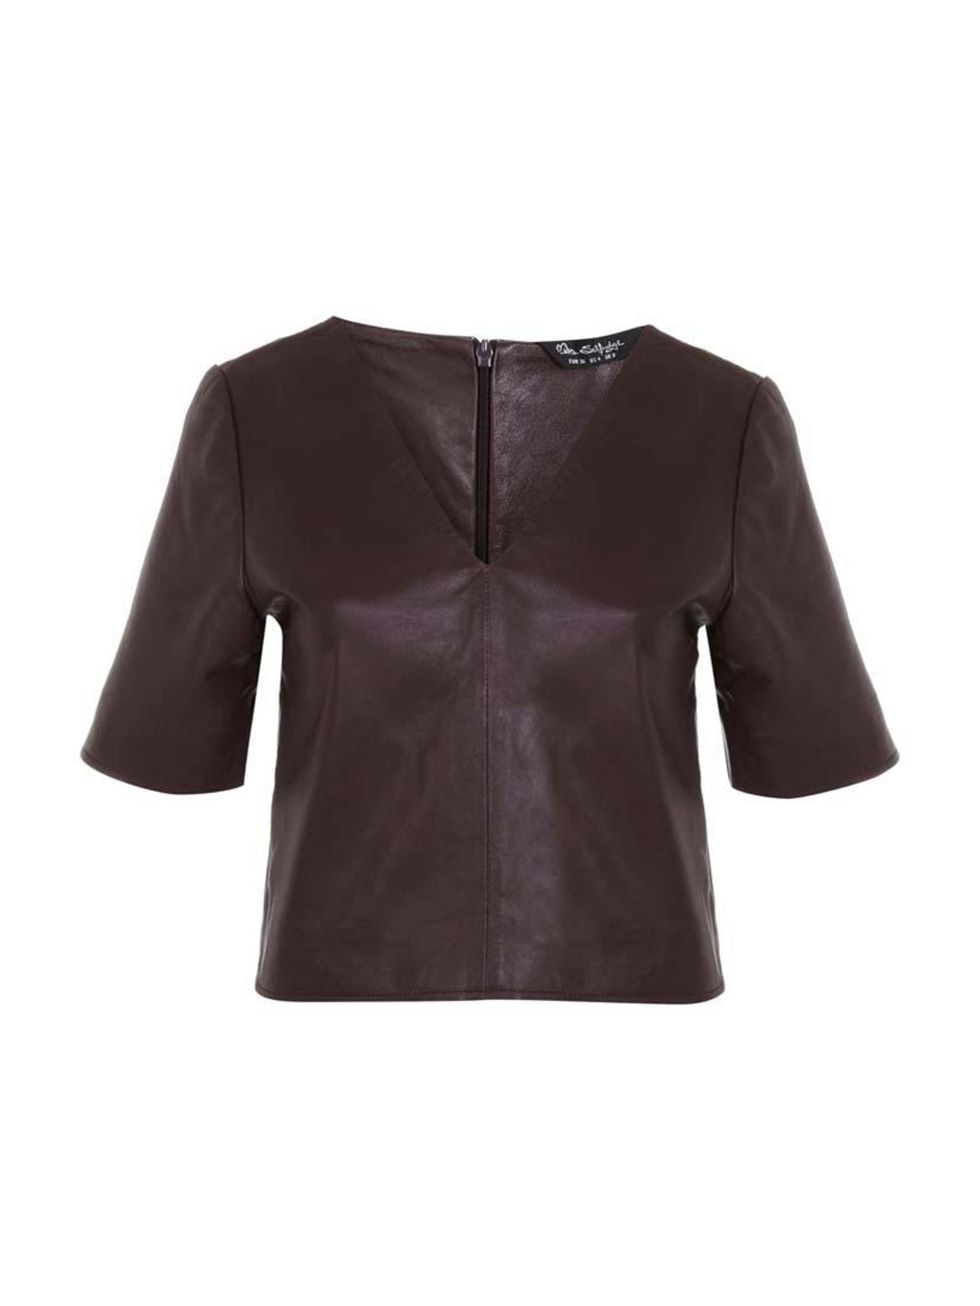 <p>Associate Health & Beauty Editor Amy Lawrenson couldn't resist this little leather tee - perfect for autumn layering.</p>

<p> </p>

<p><a href="http://www.missselfridge.com/en/msuk/product/new-in-299046/clothing-299139/burgundy-v-neck-leather-tee-3255